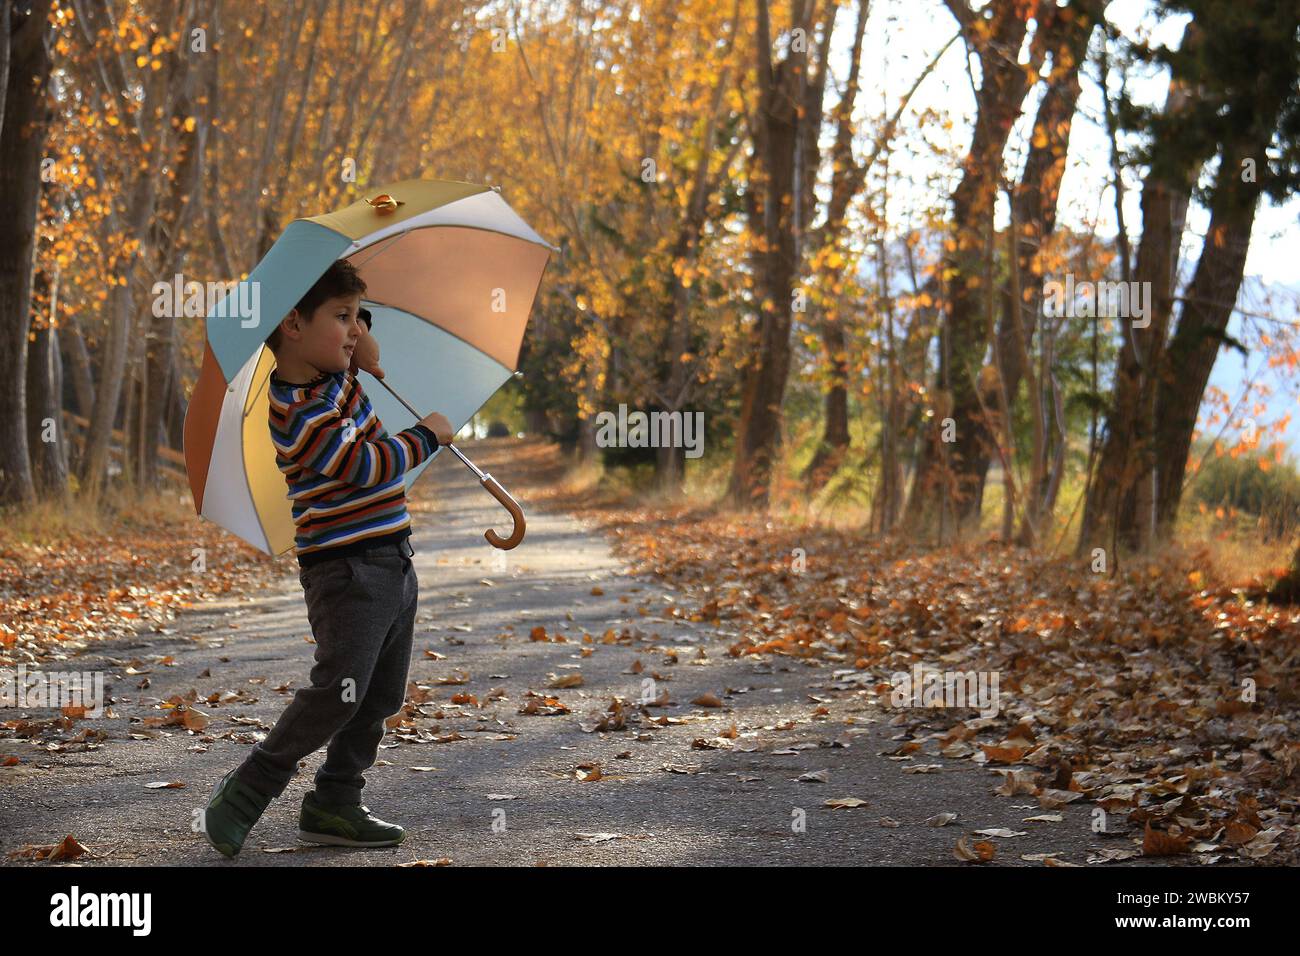 A child having fun with an umbrella amid autunm leaves. Stock Photo